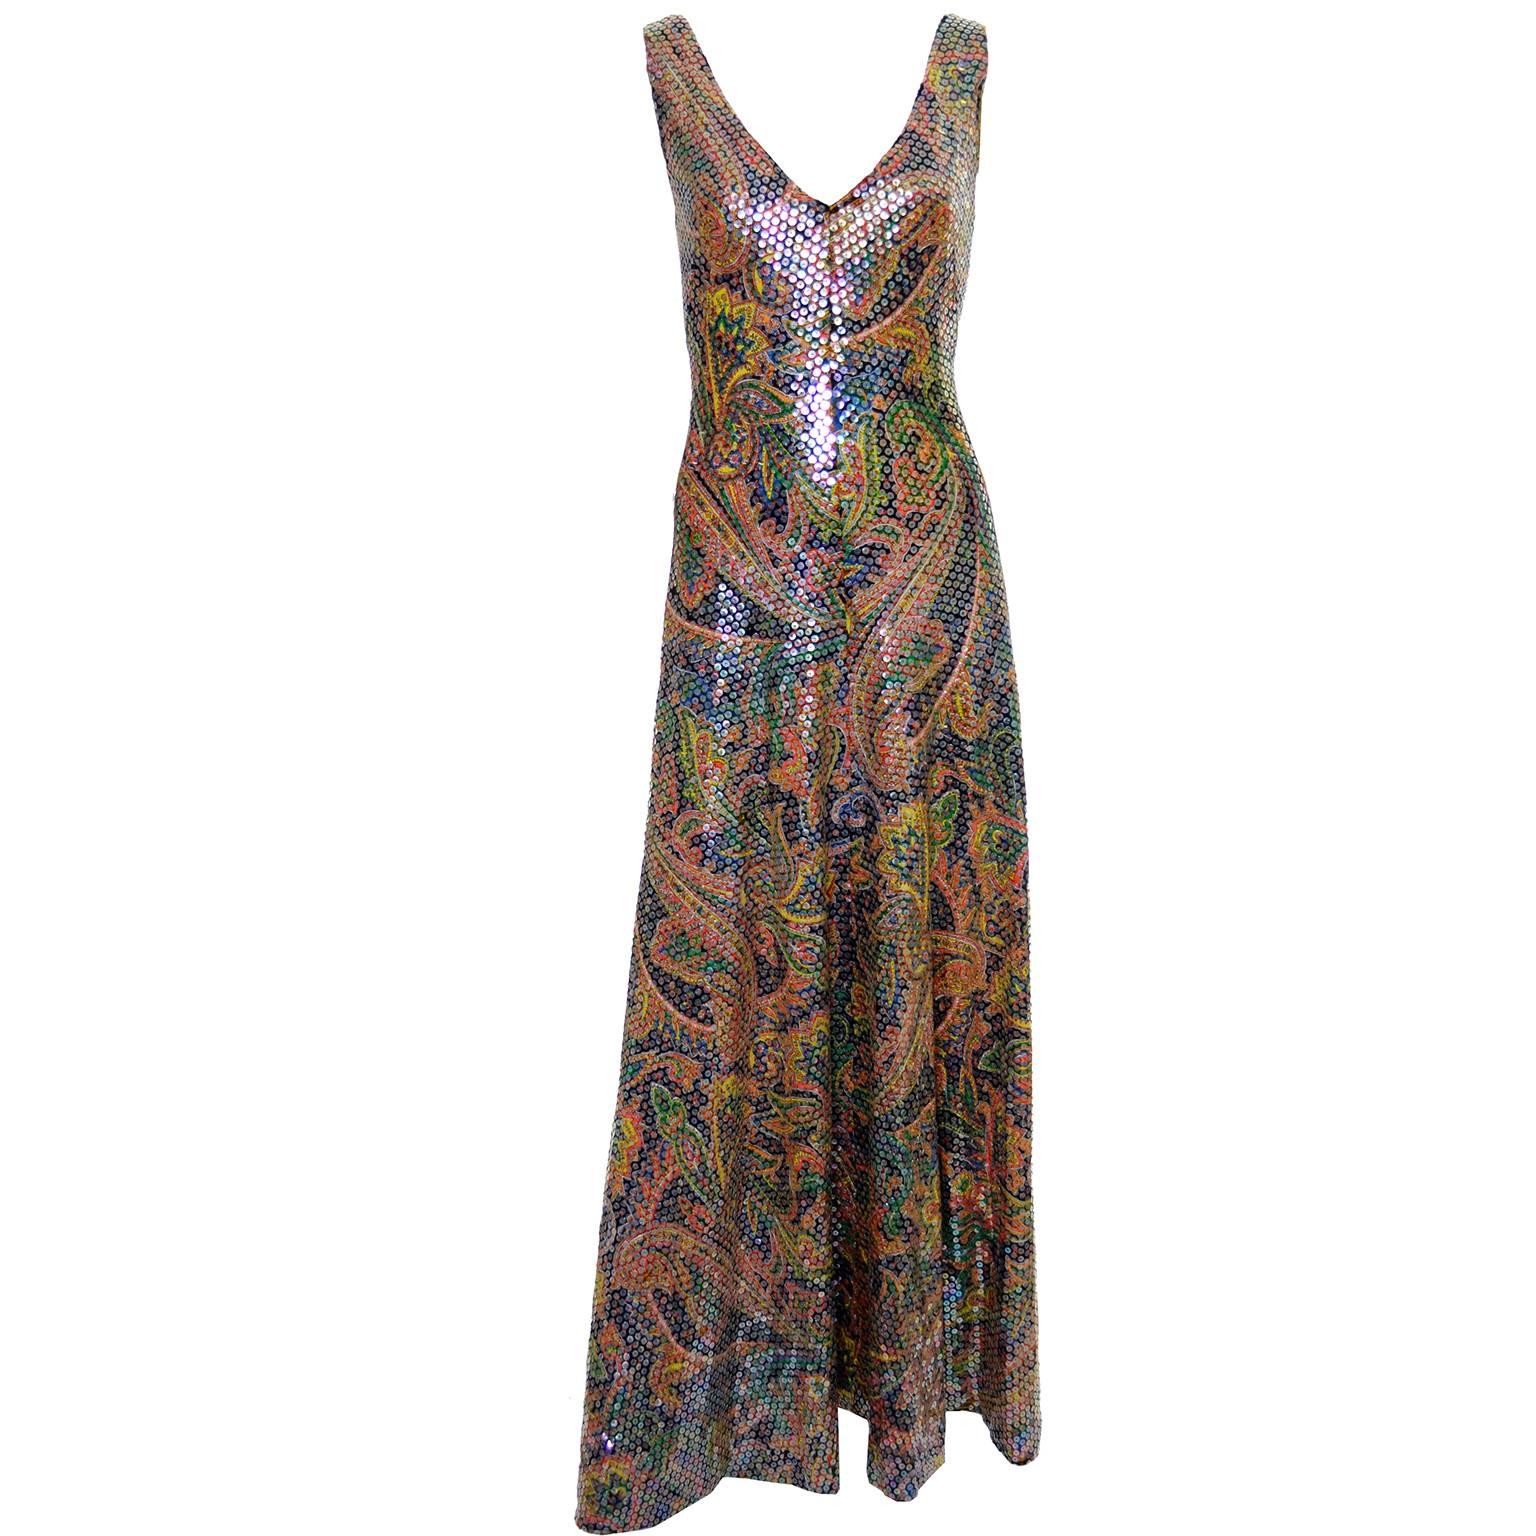 Women's 1970s Vintage Dress Sequins Psychedelic Paisley Formal Evening Gown